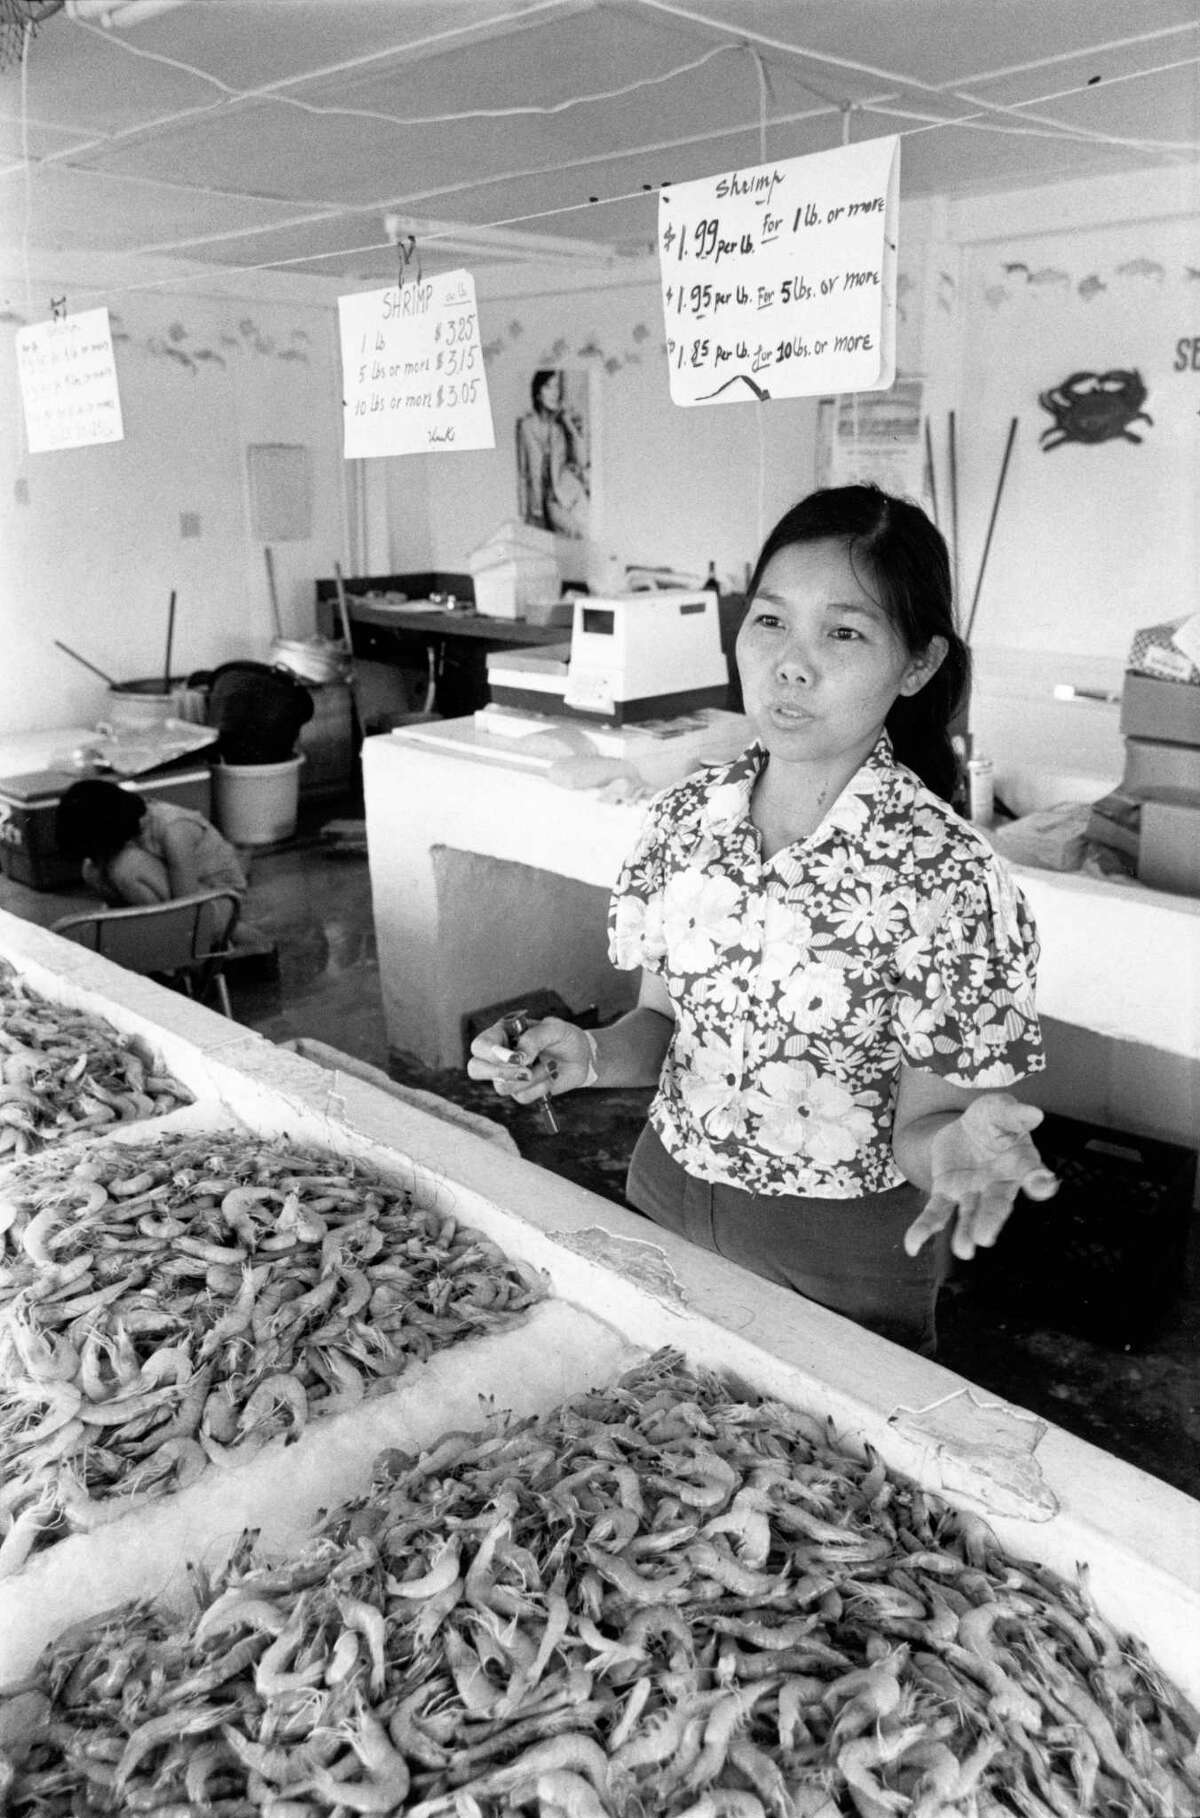 Tam Nguyen, 35, photographed in August of 1979 explains from behind the counter of her brother's fish house in Seabrook that her people feel welcome at their new home on Galveston Bay but don't understand many of the laws and customs.